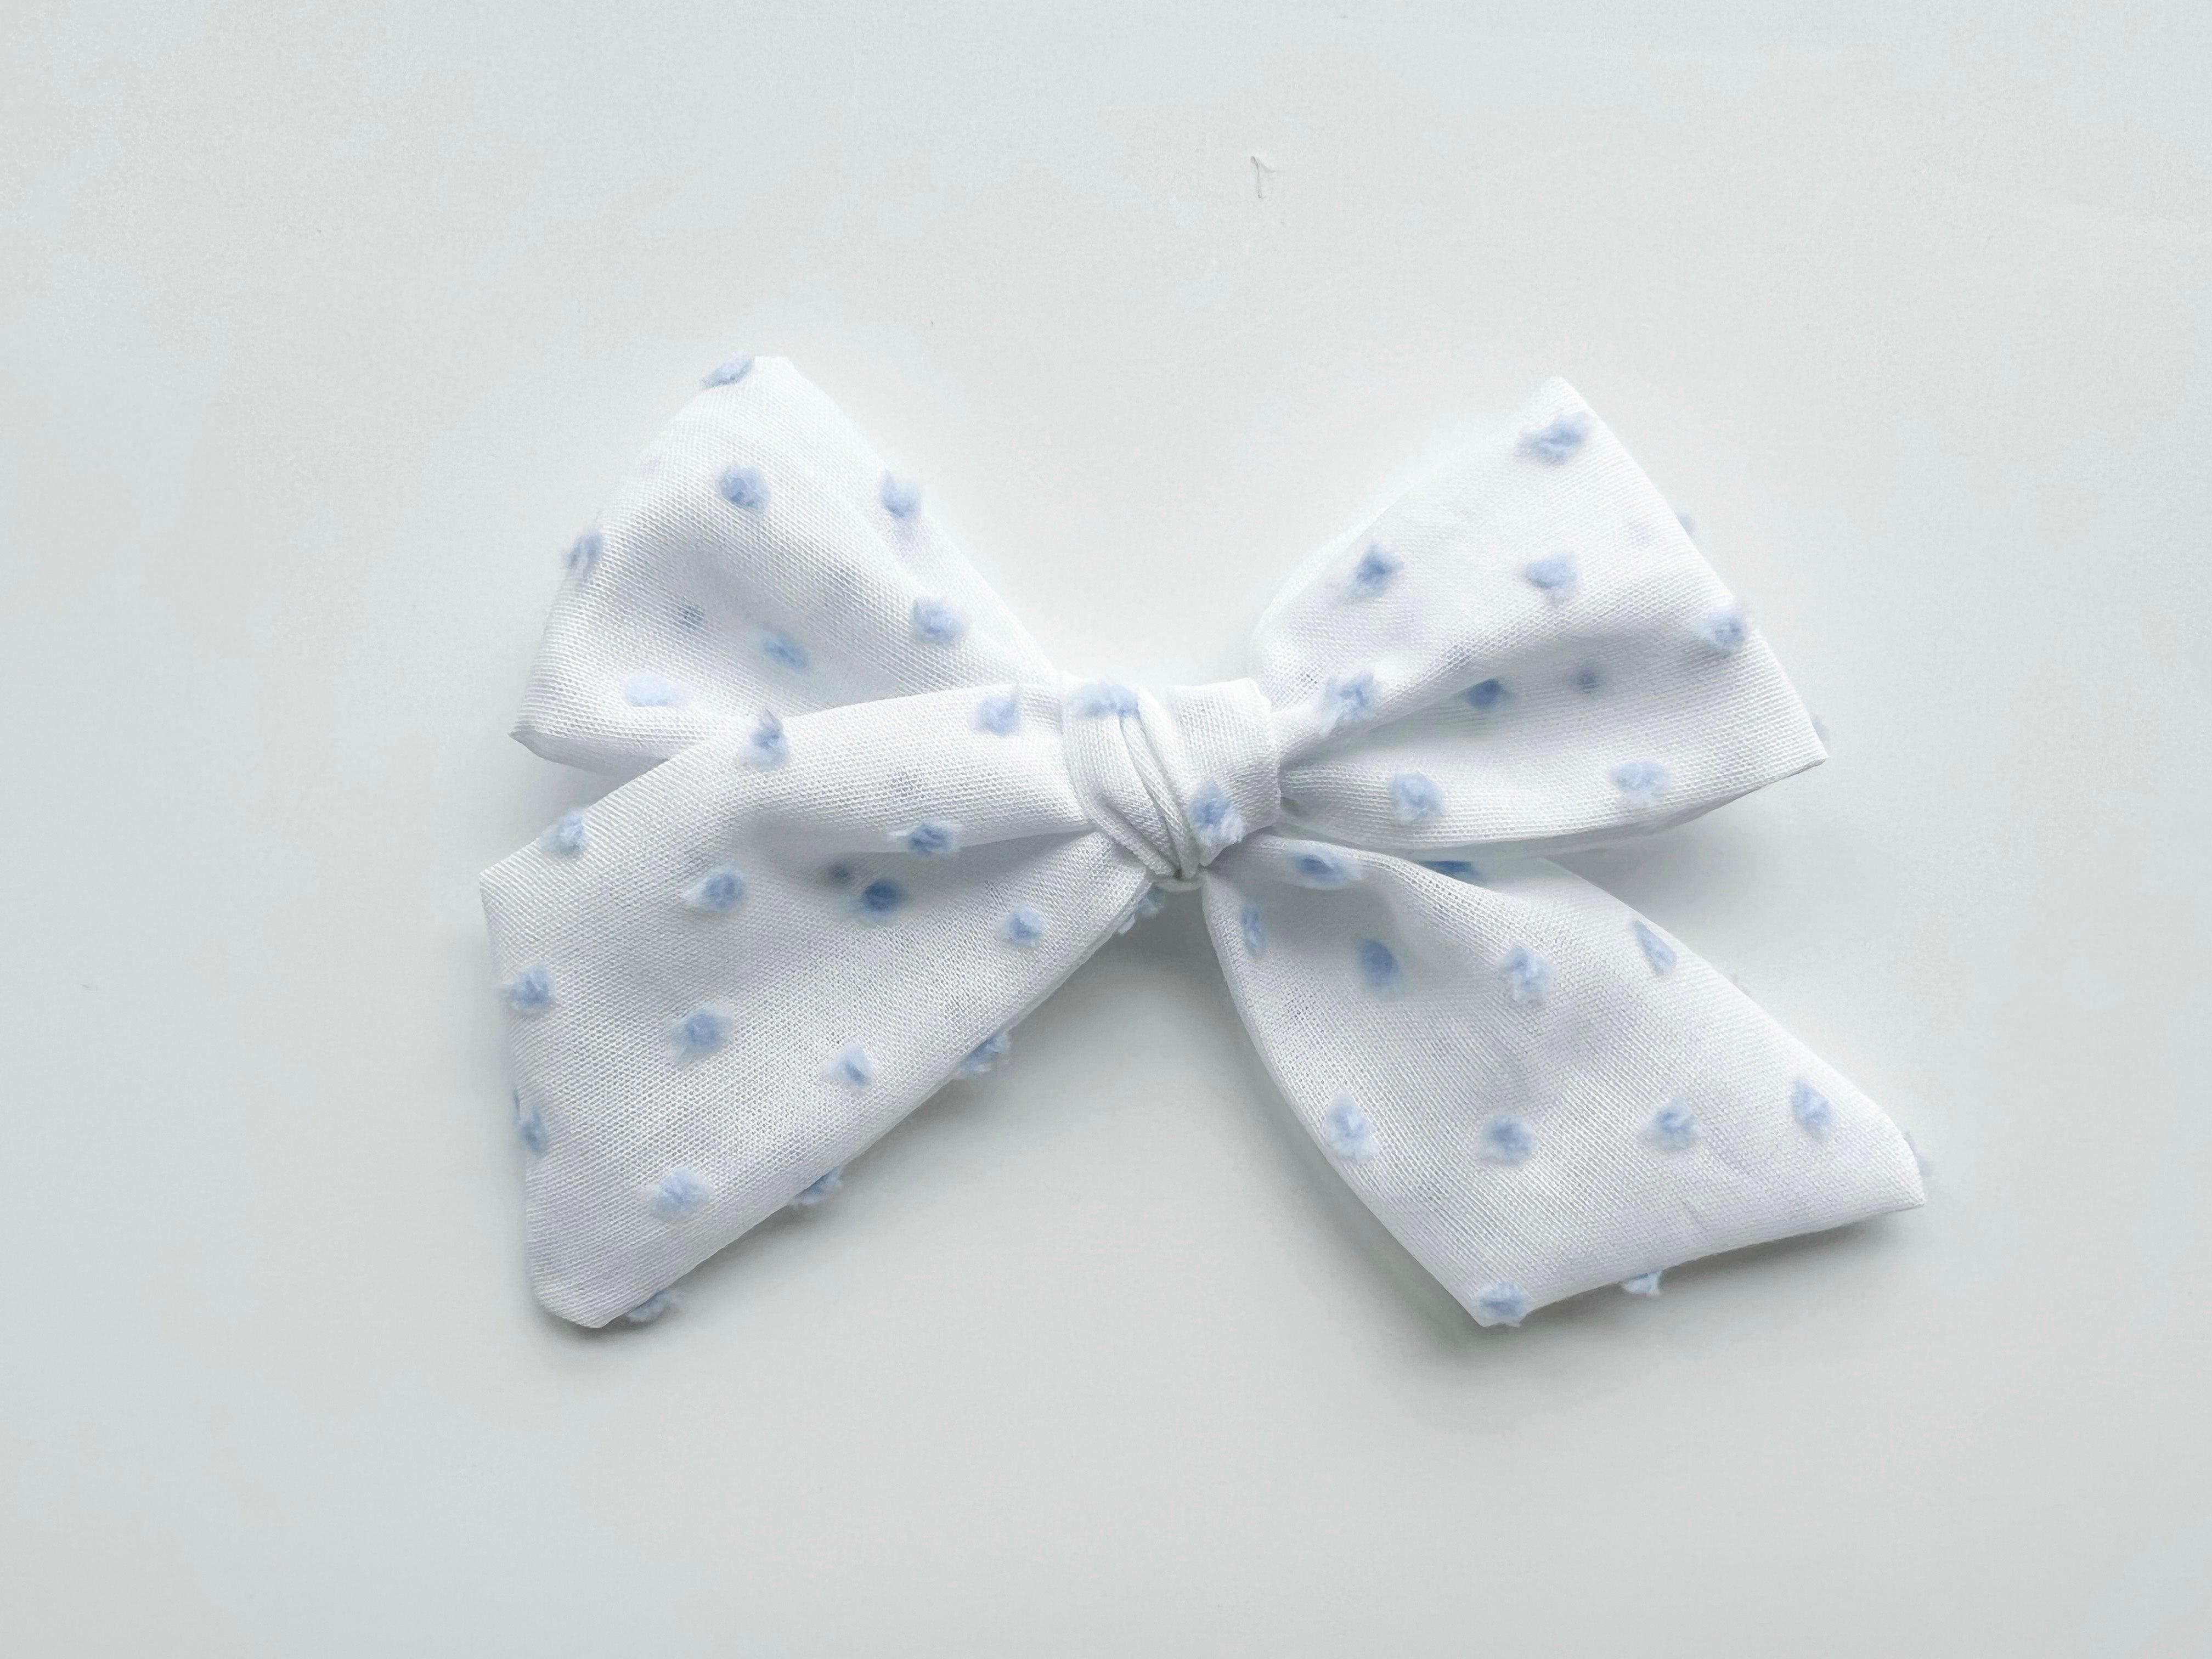 Pinwheel Bow - Blue Swiss Dot | Nashville Bow Co. - Classic Hair Bows, Bow Ties, Basket Bows, Pacifier Clips, Wreath Sashes, Swaddle Bows. Classic Southern Charm.